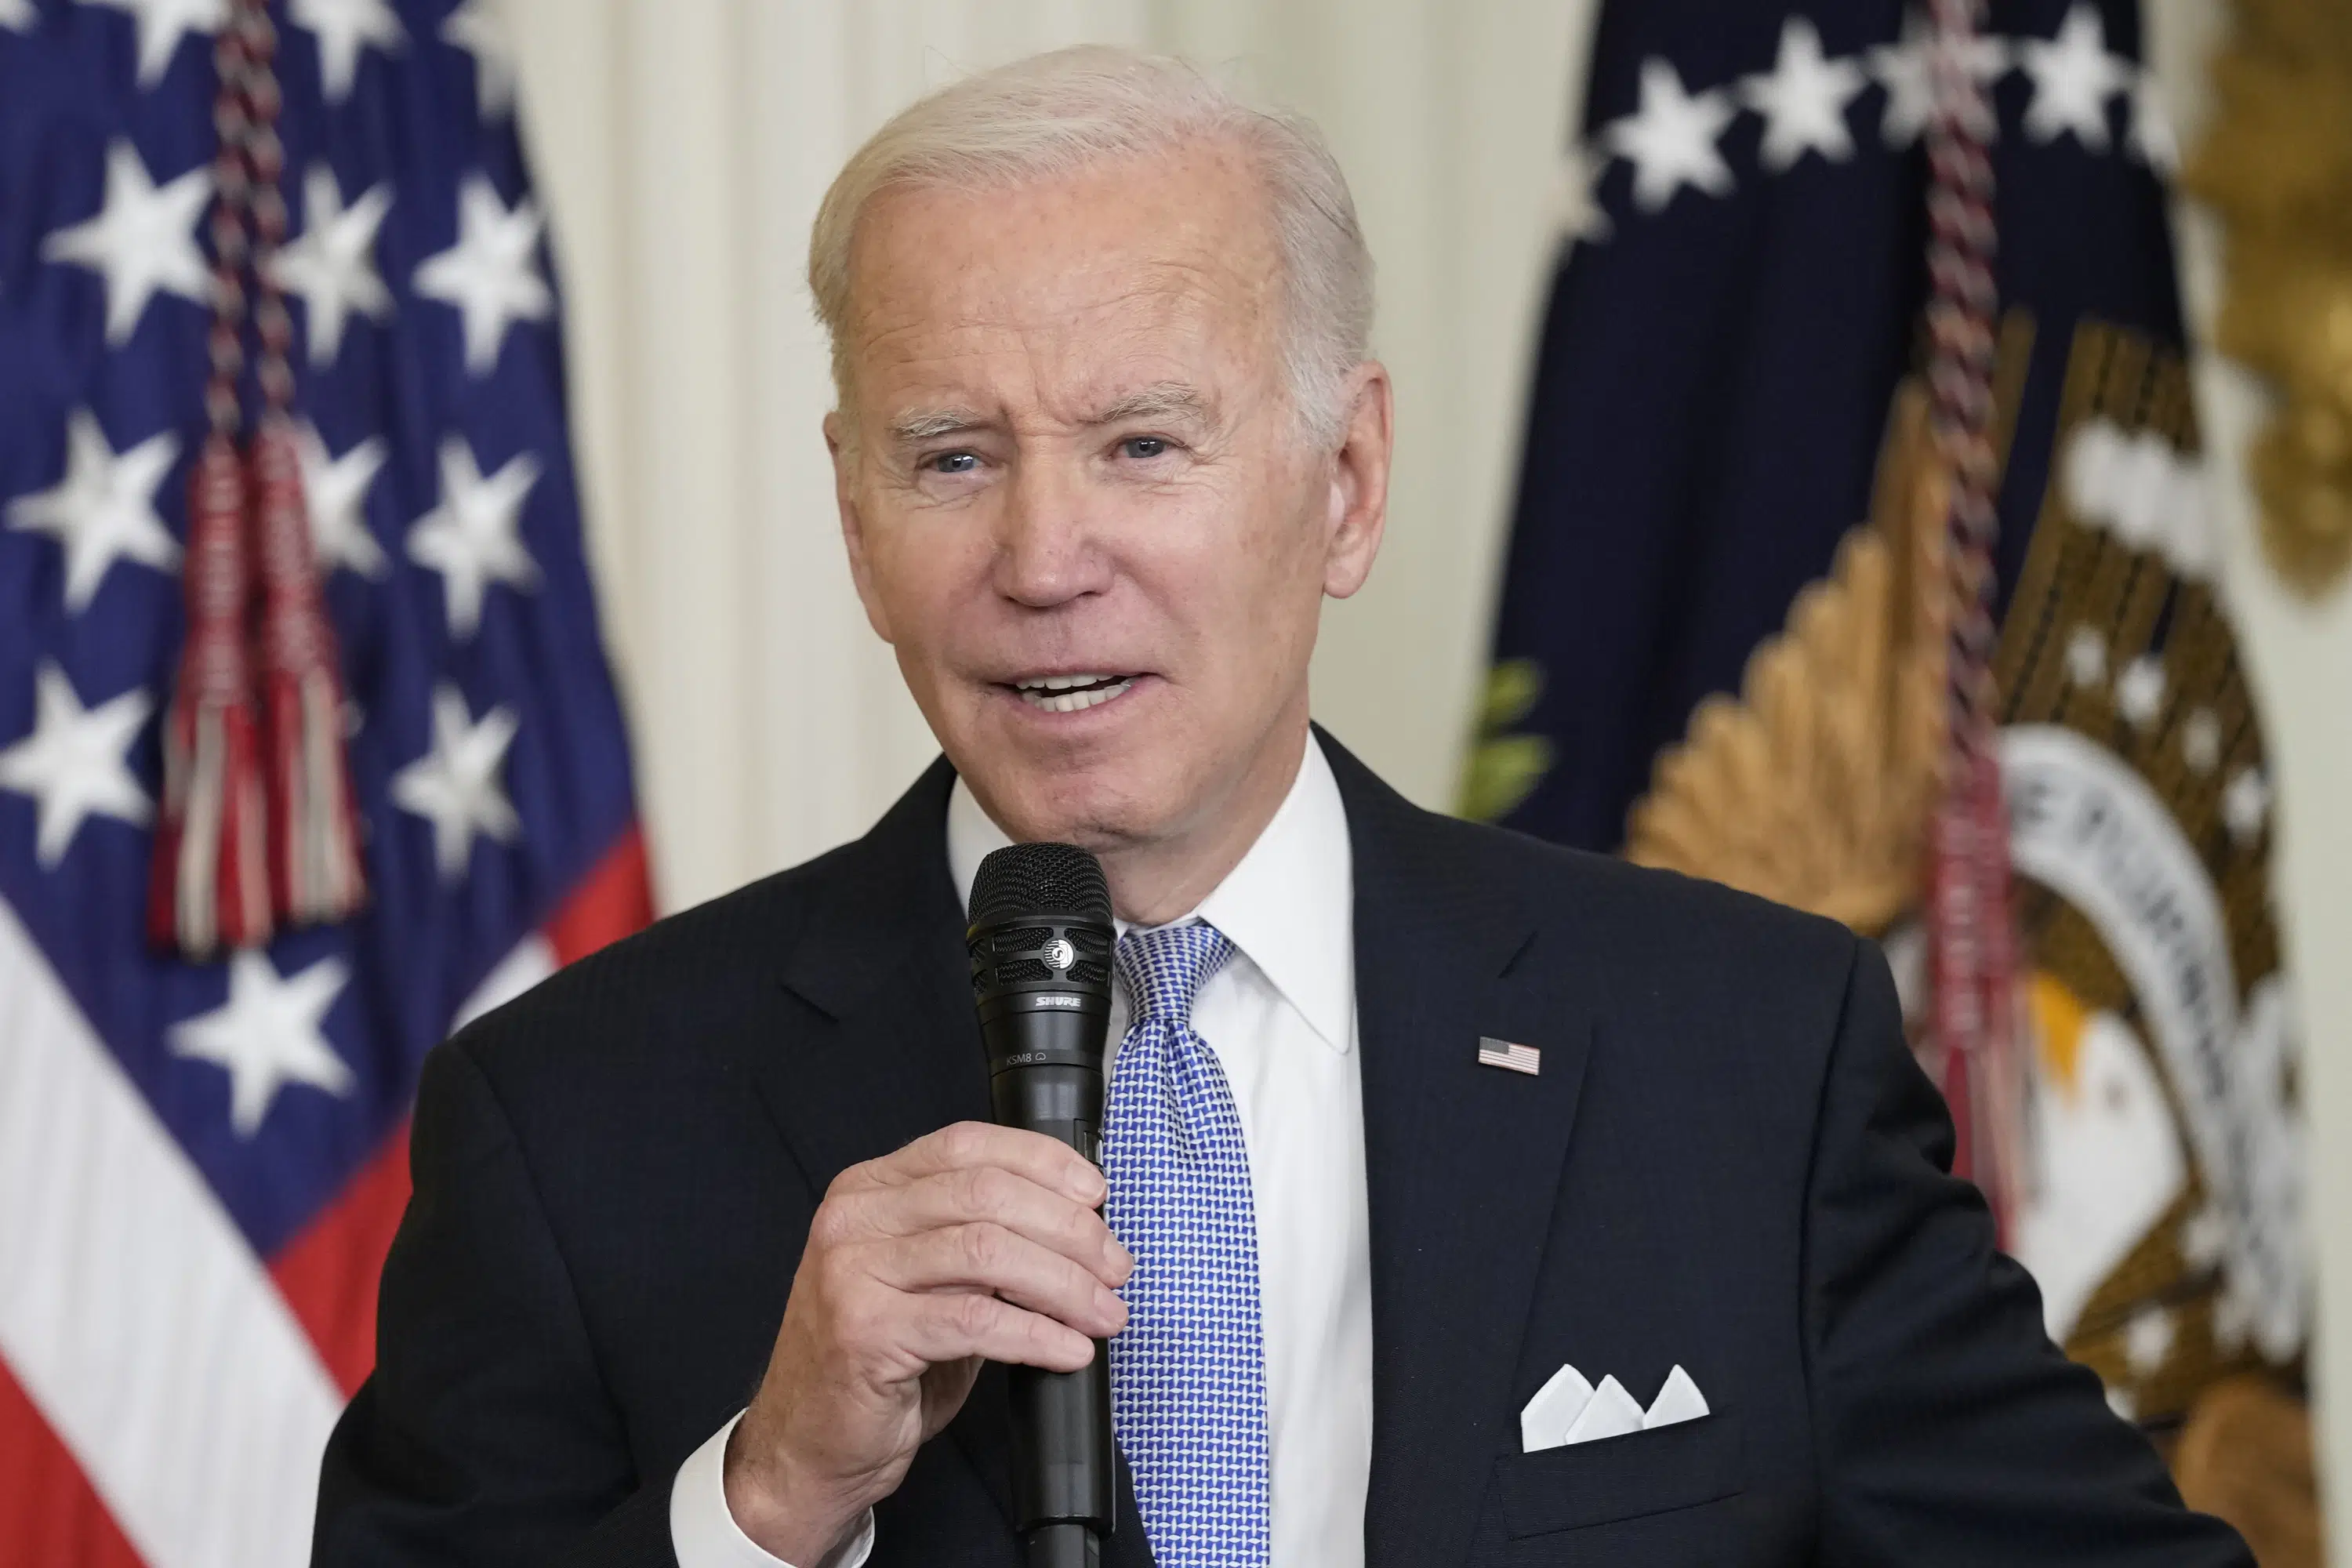 The FBI searched the Biden home and found items marked classified